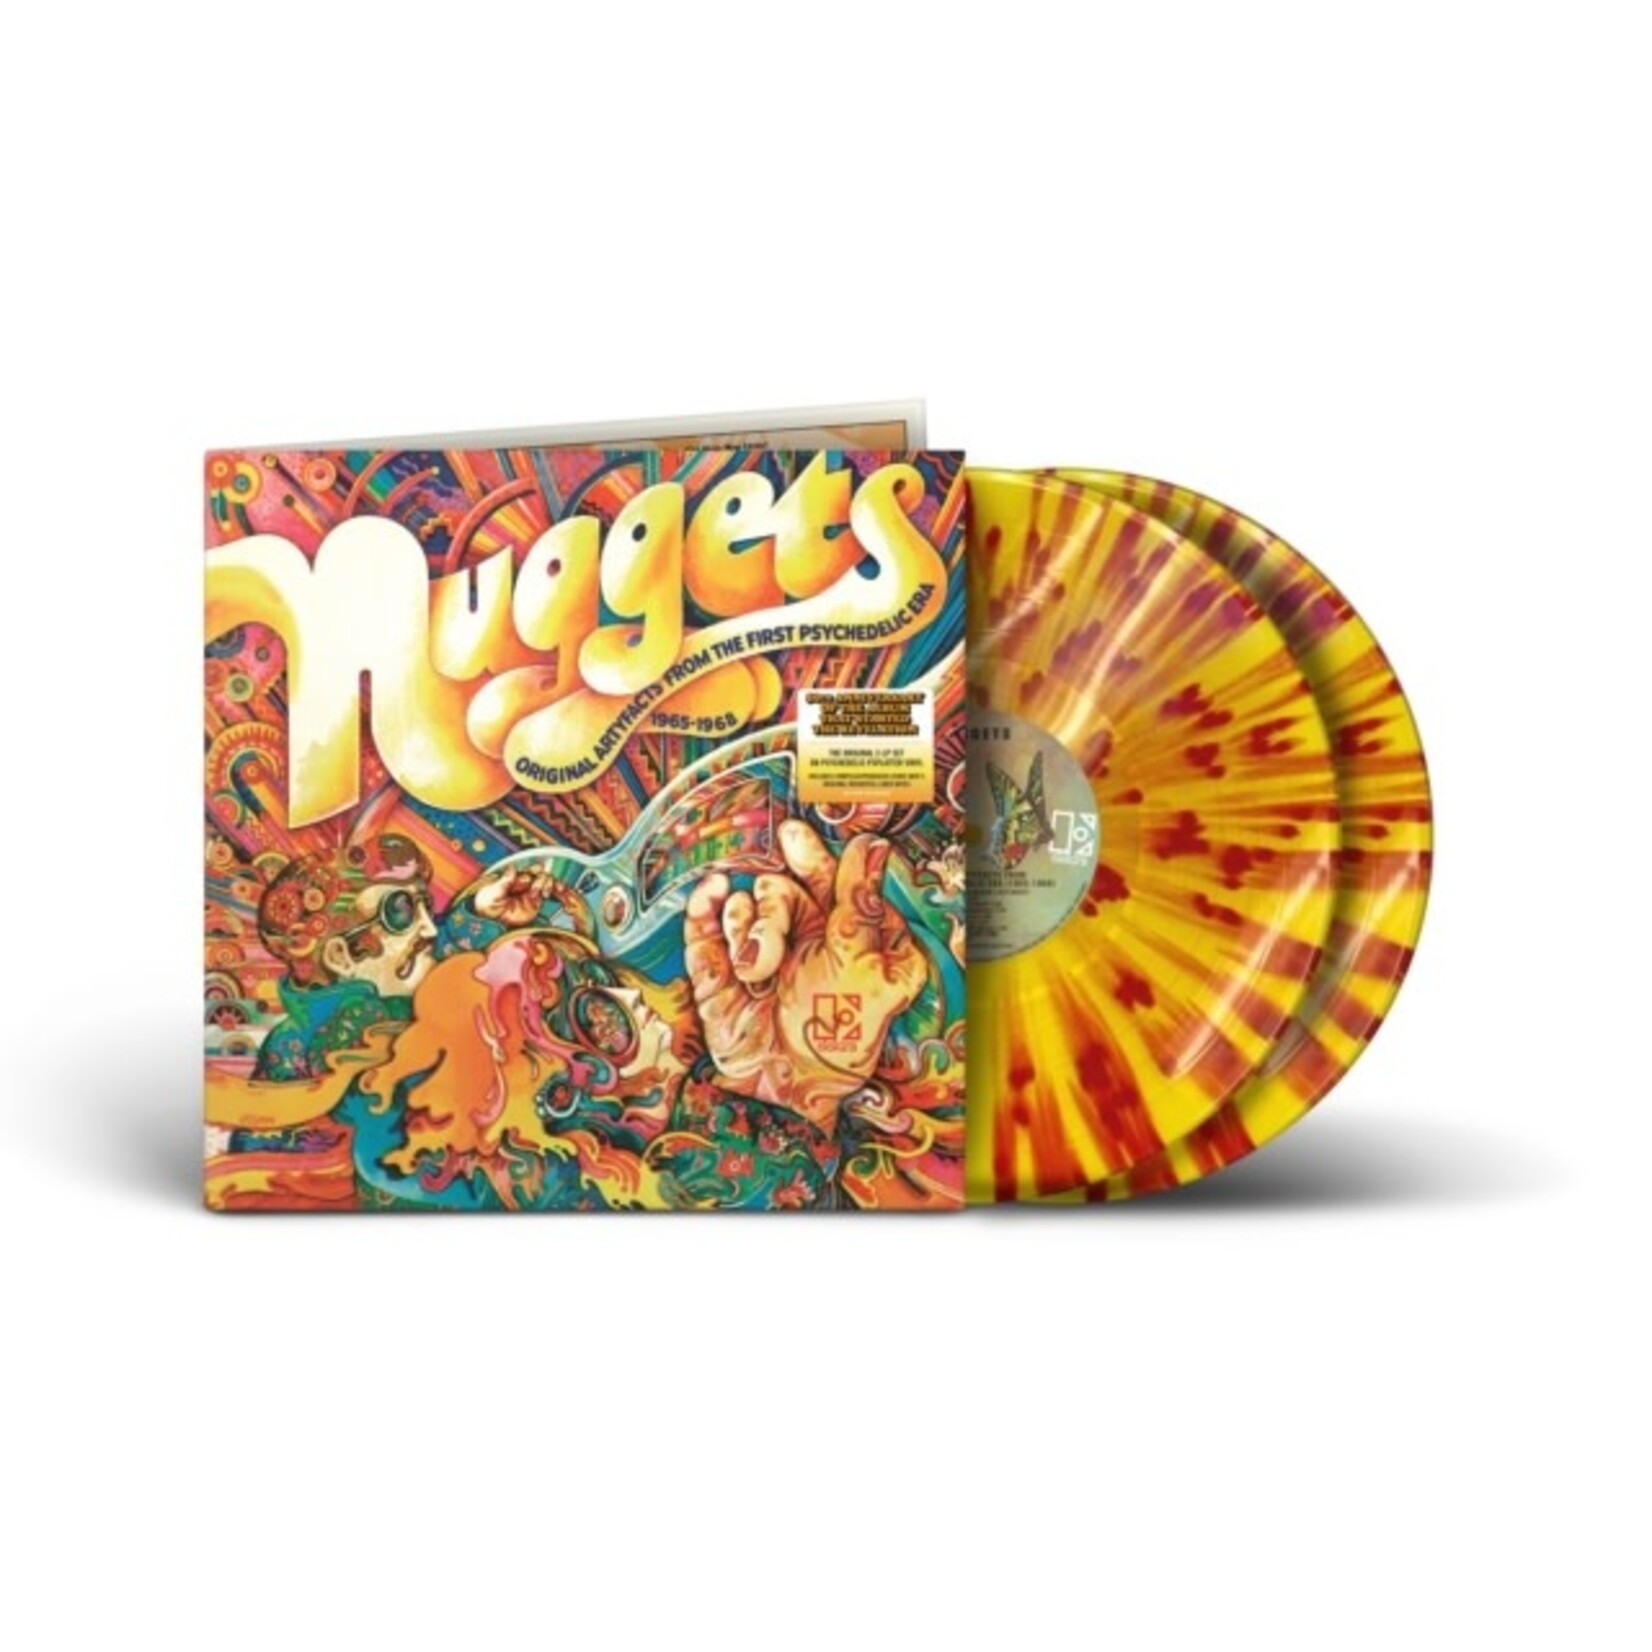 Various Artists - Nuggets: Original Artyfacts From The First Psychedelic Era 1965-1968 (Coloured Vinyl) [2LP] (SYEOR24)